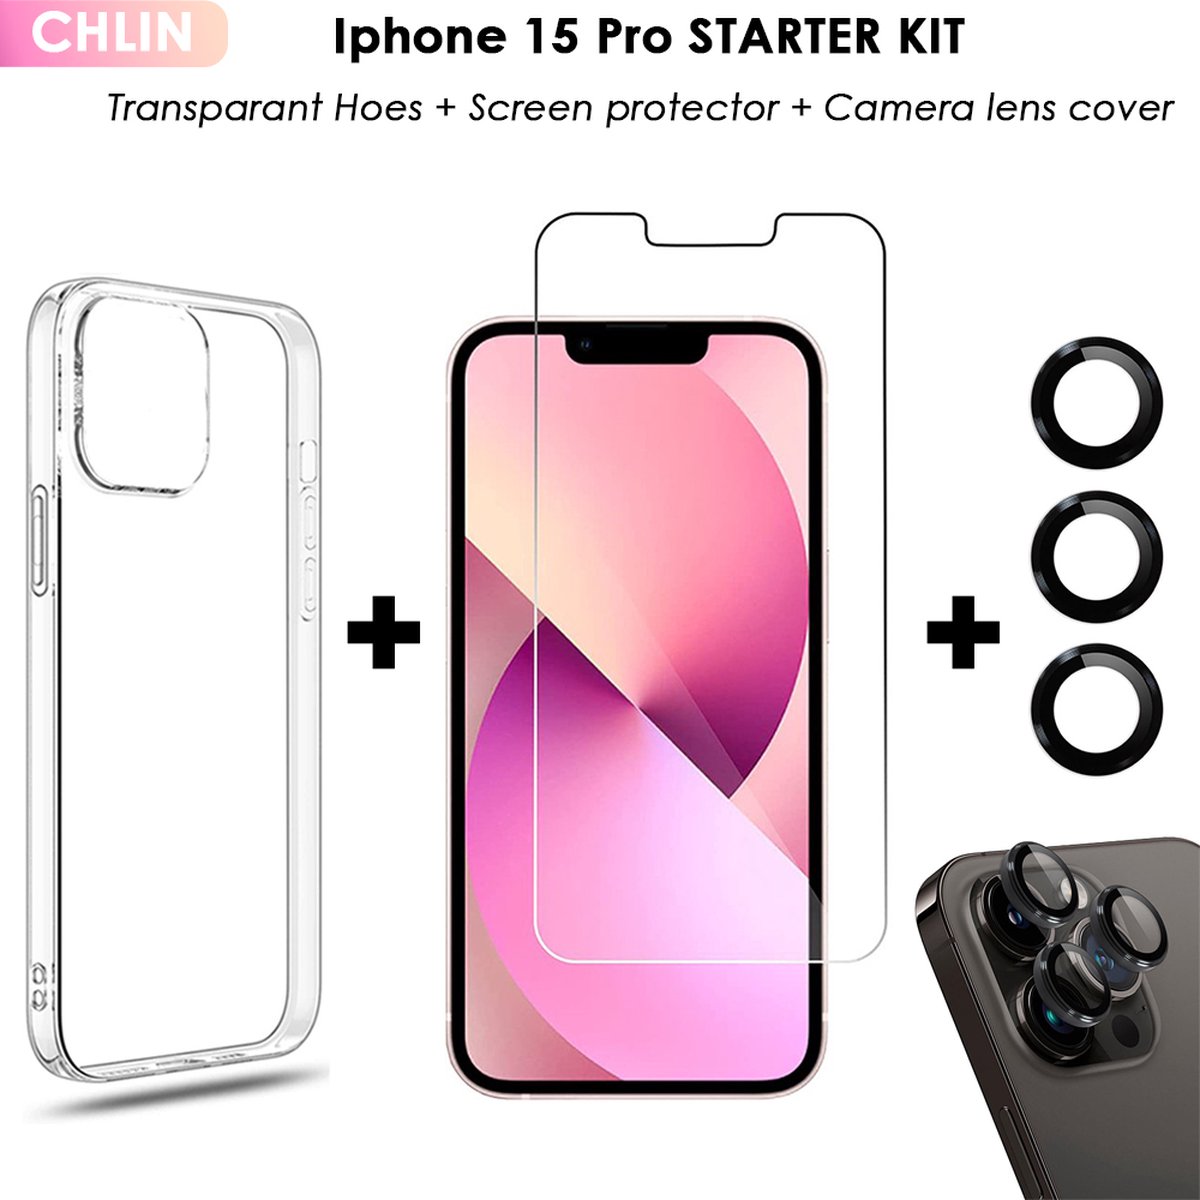 CL CHLIN® - Iphone 15 PRO Starter Kit (hoesje + screen protector + camera lens case) - Iphone 15 PRO screen protector - Iphone 15 PRO transprarant Hoesje - Iphone 15 PRO case - Iphone 15 PRO camera lens protector